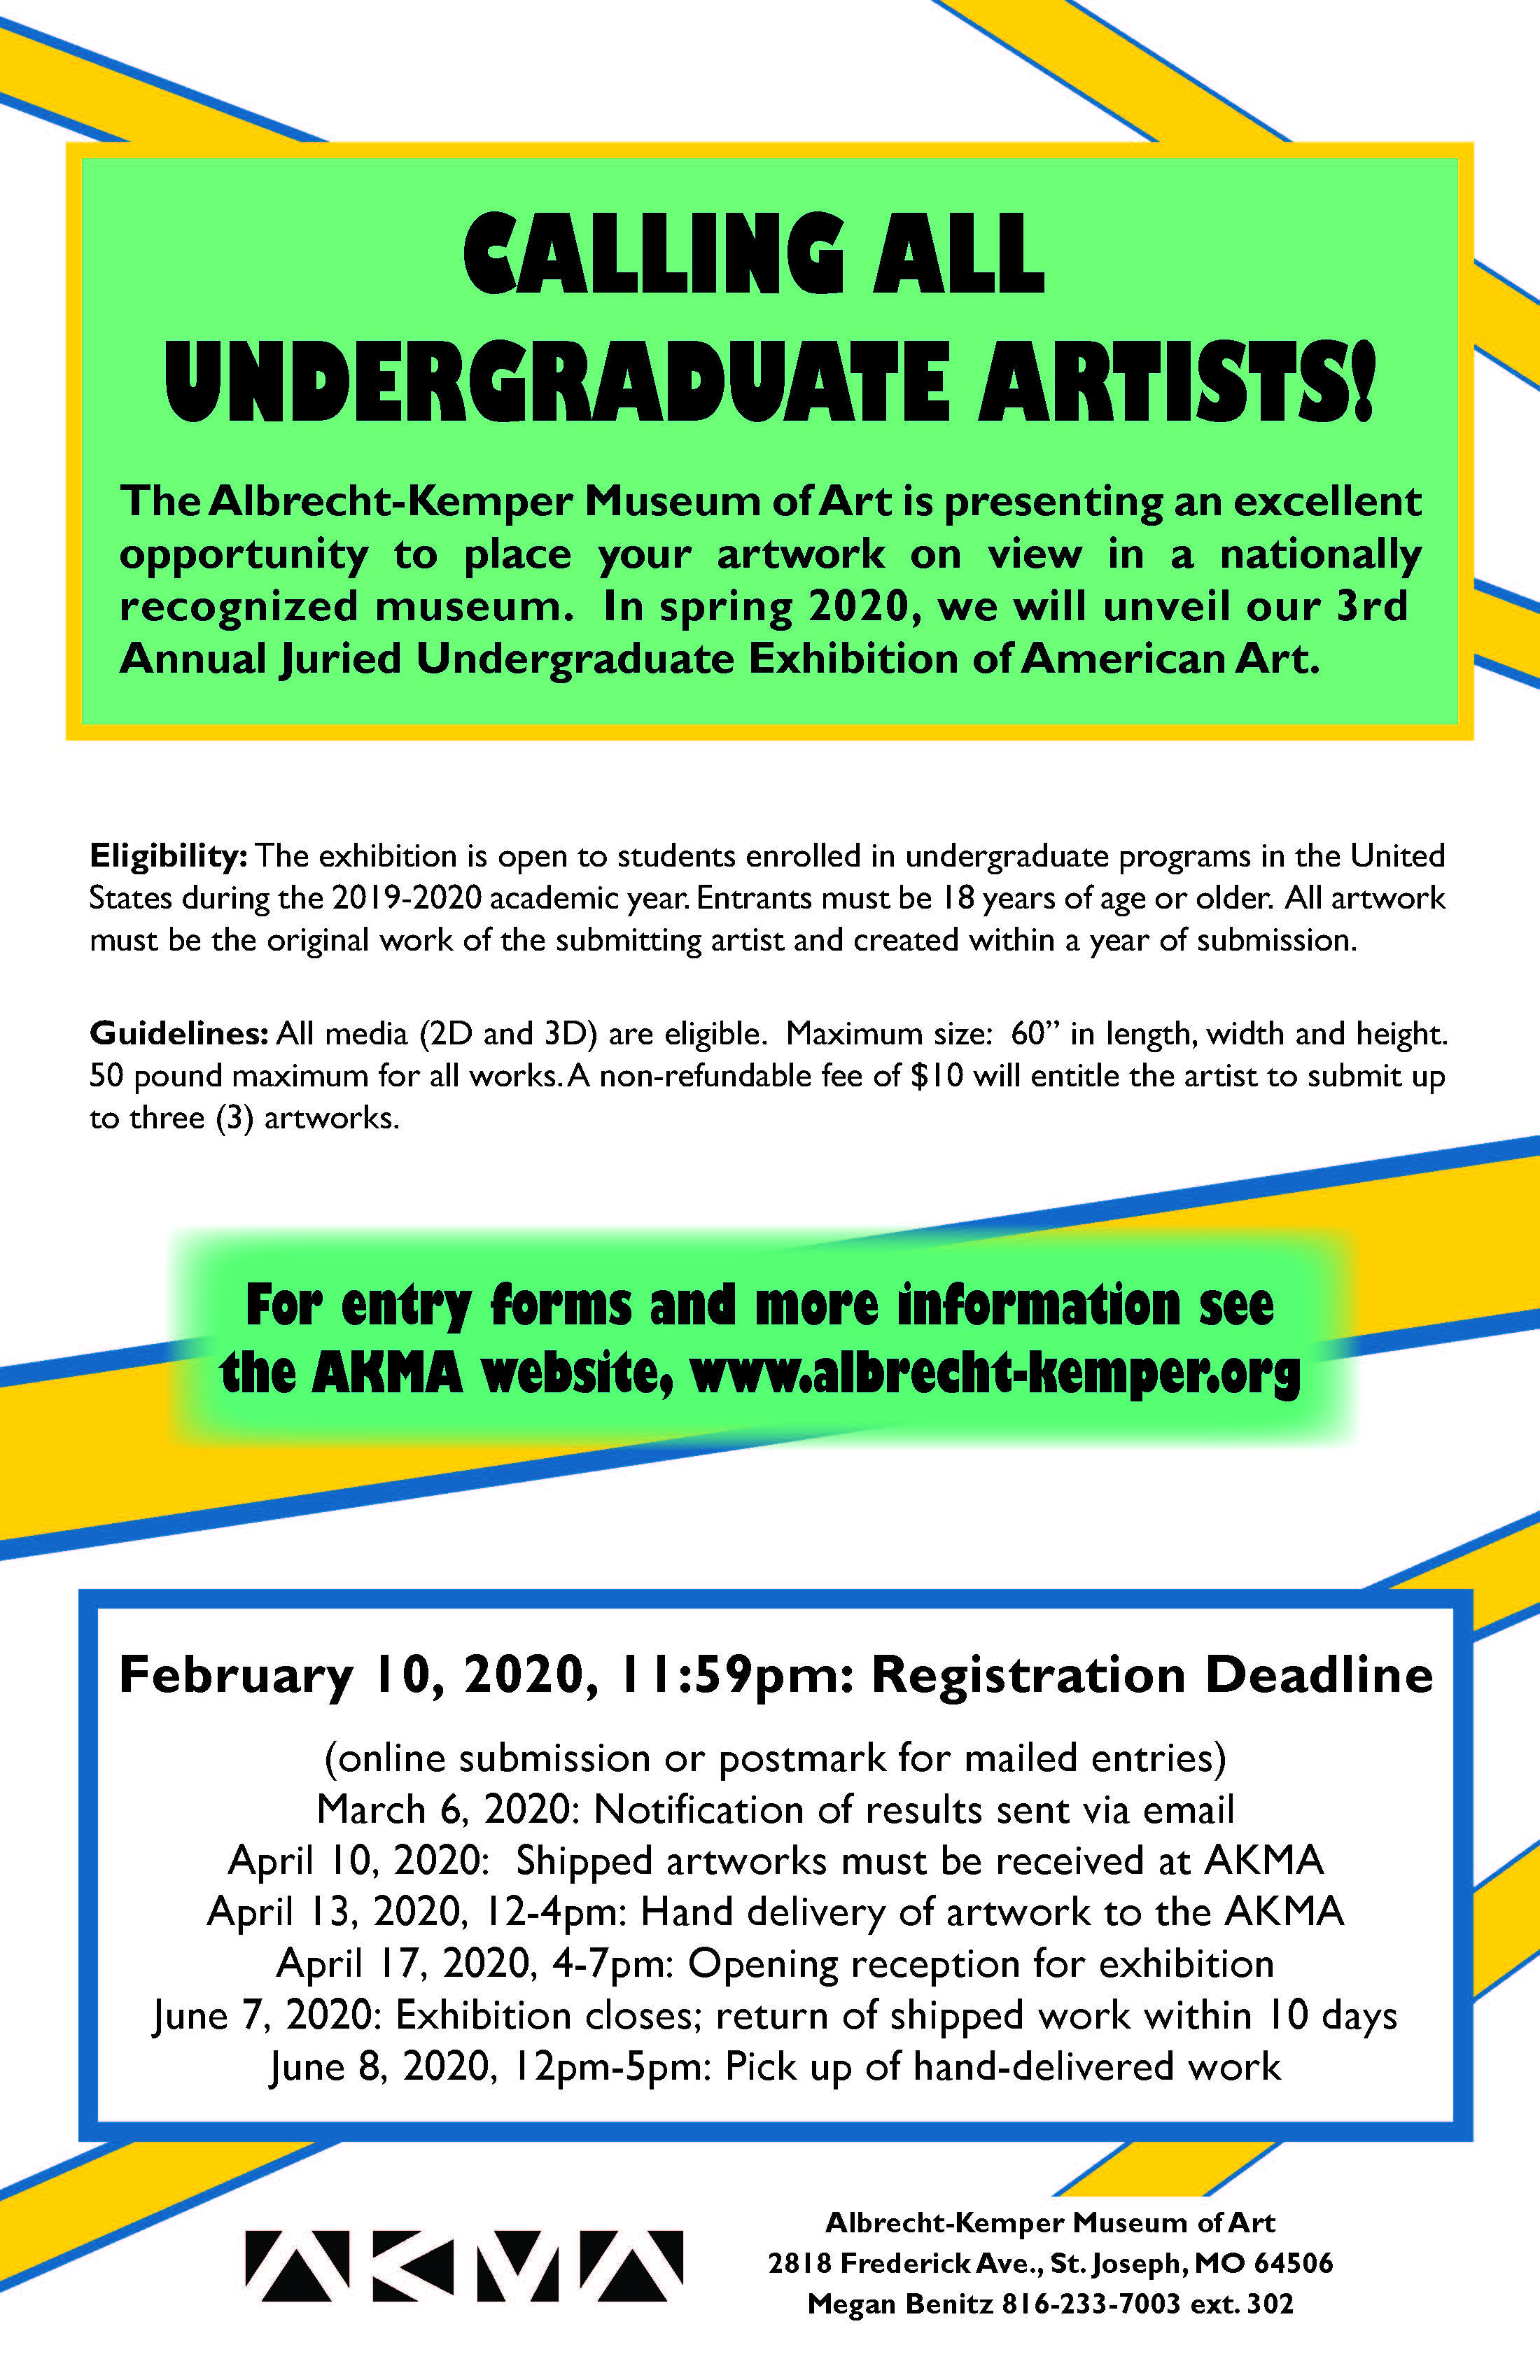 Call for Entry! Juried Undergraduate Student Exhibition Opportunity at The Albrecht-Kemper Museum of Art